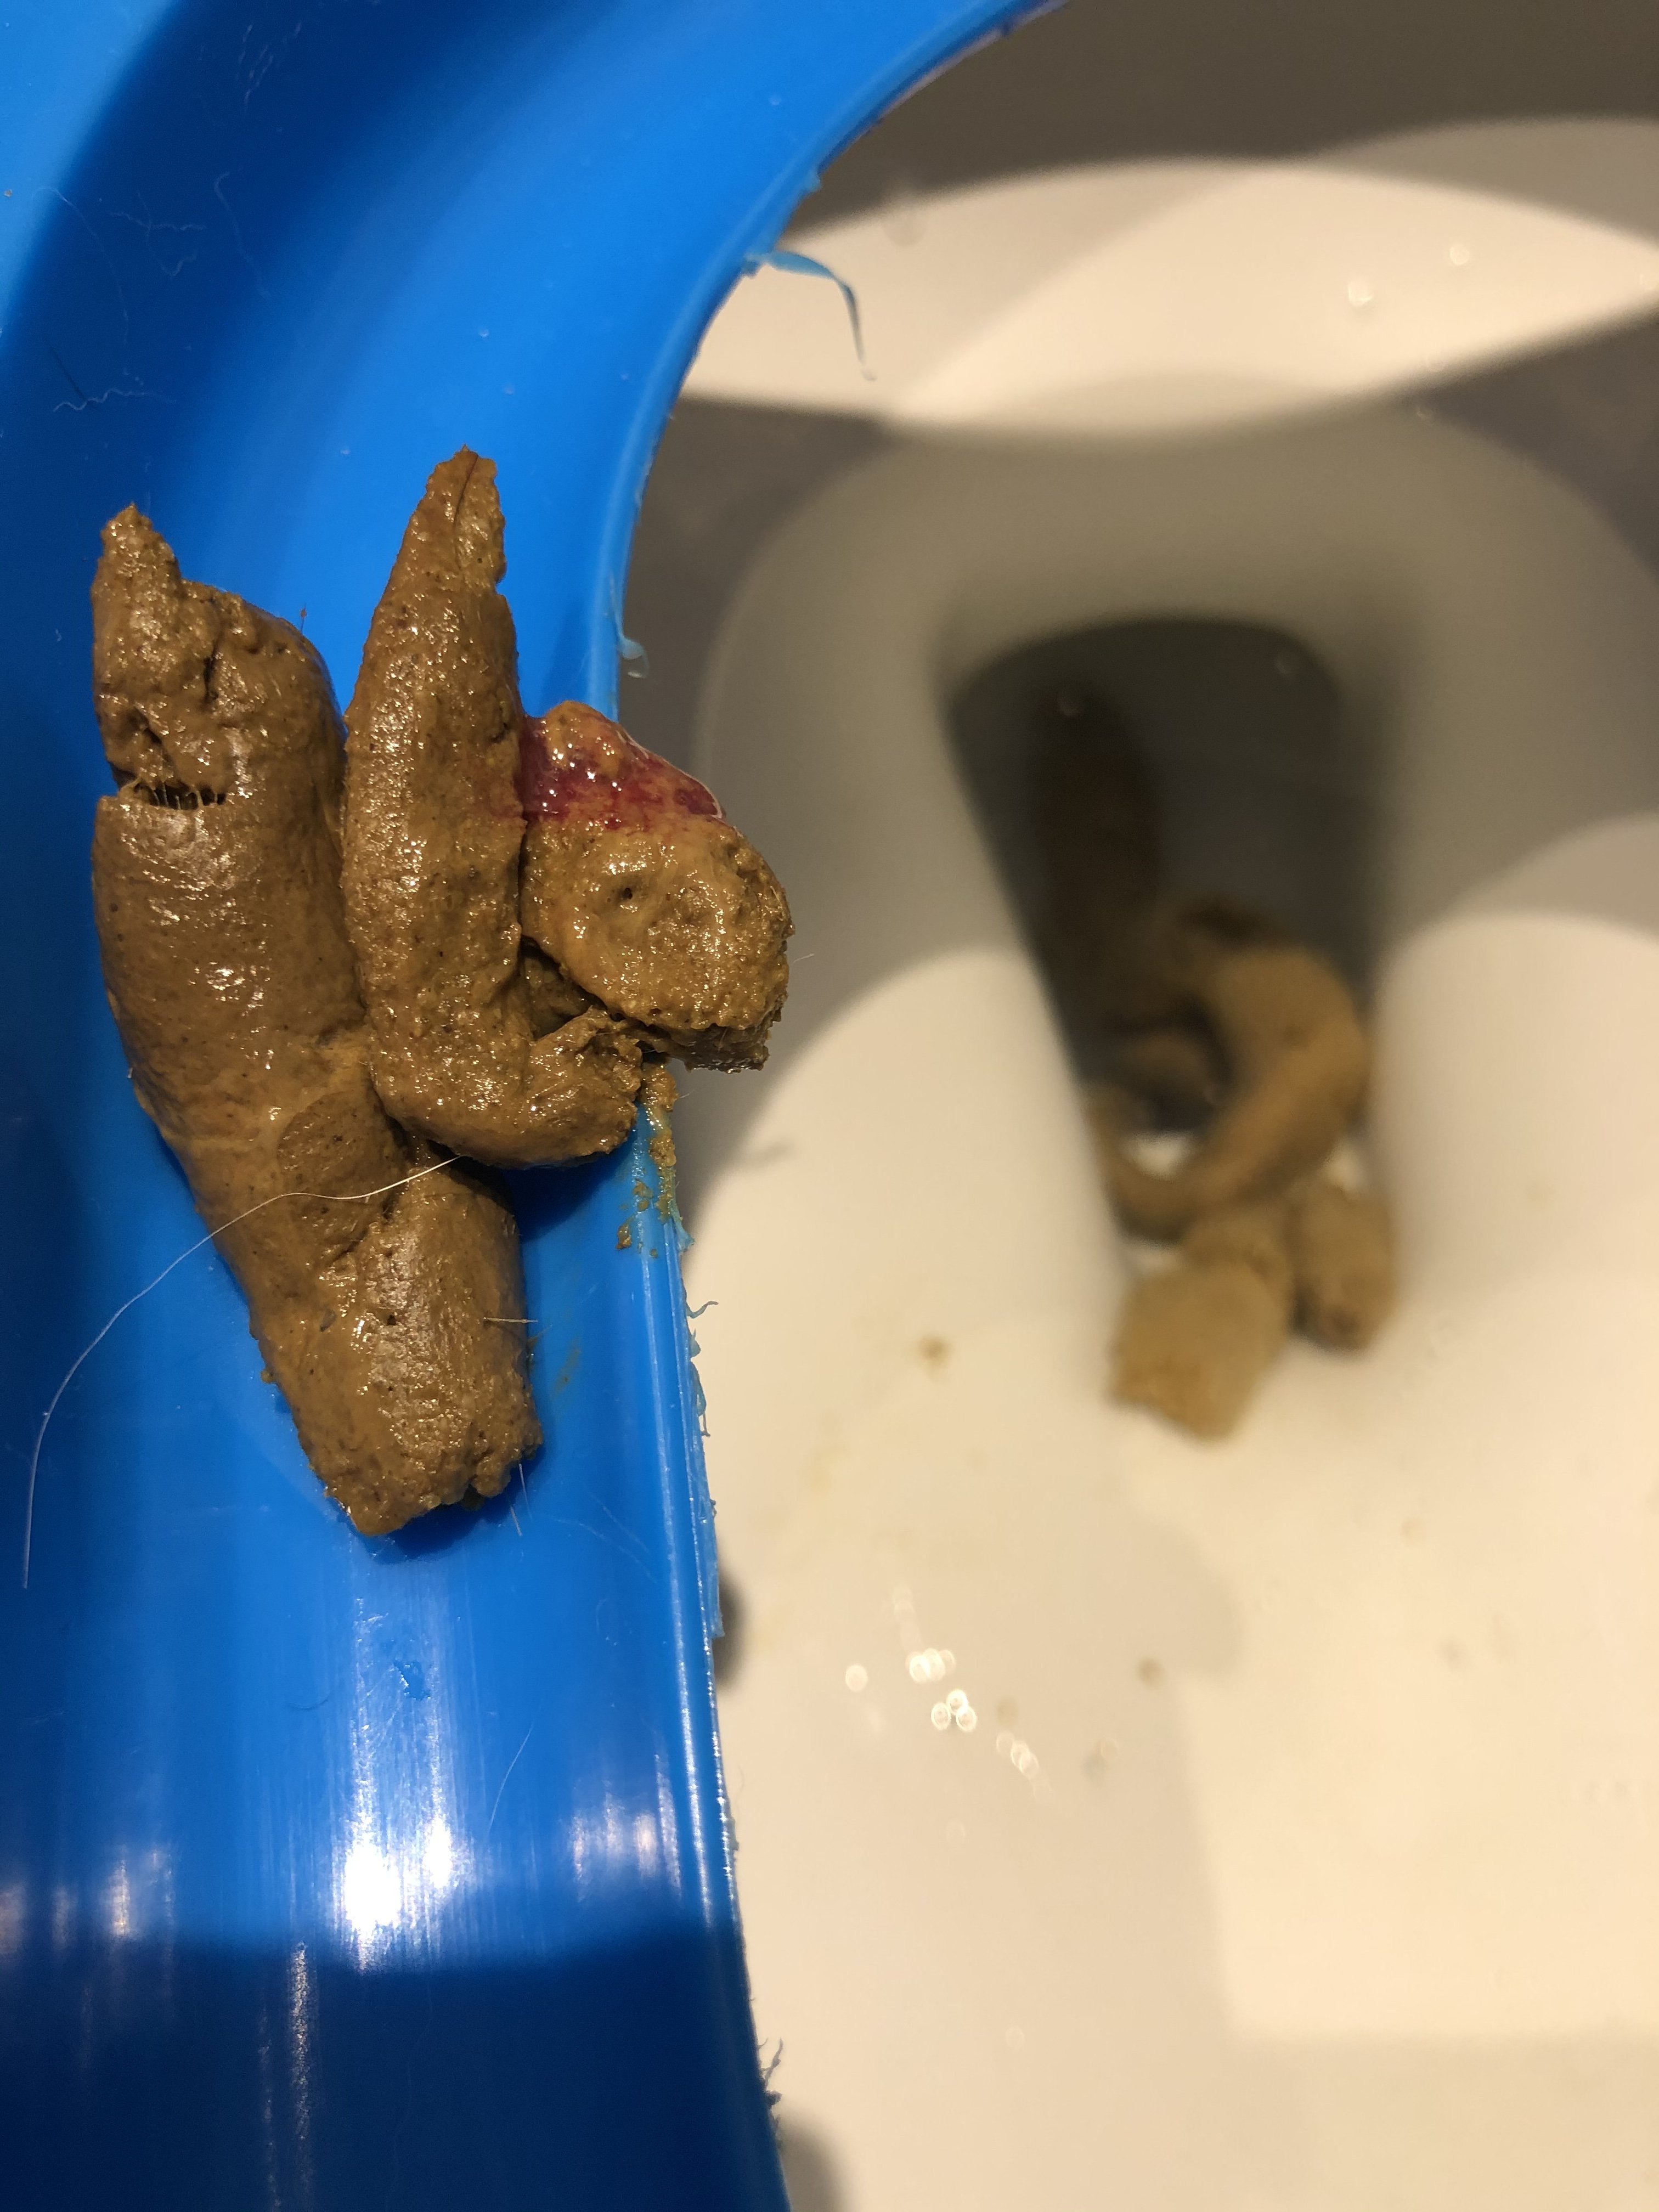 Blood/Mucus in stool first time TheCatSite